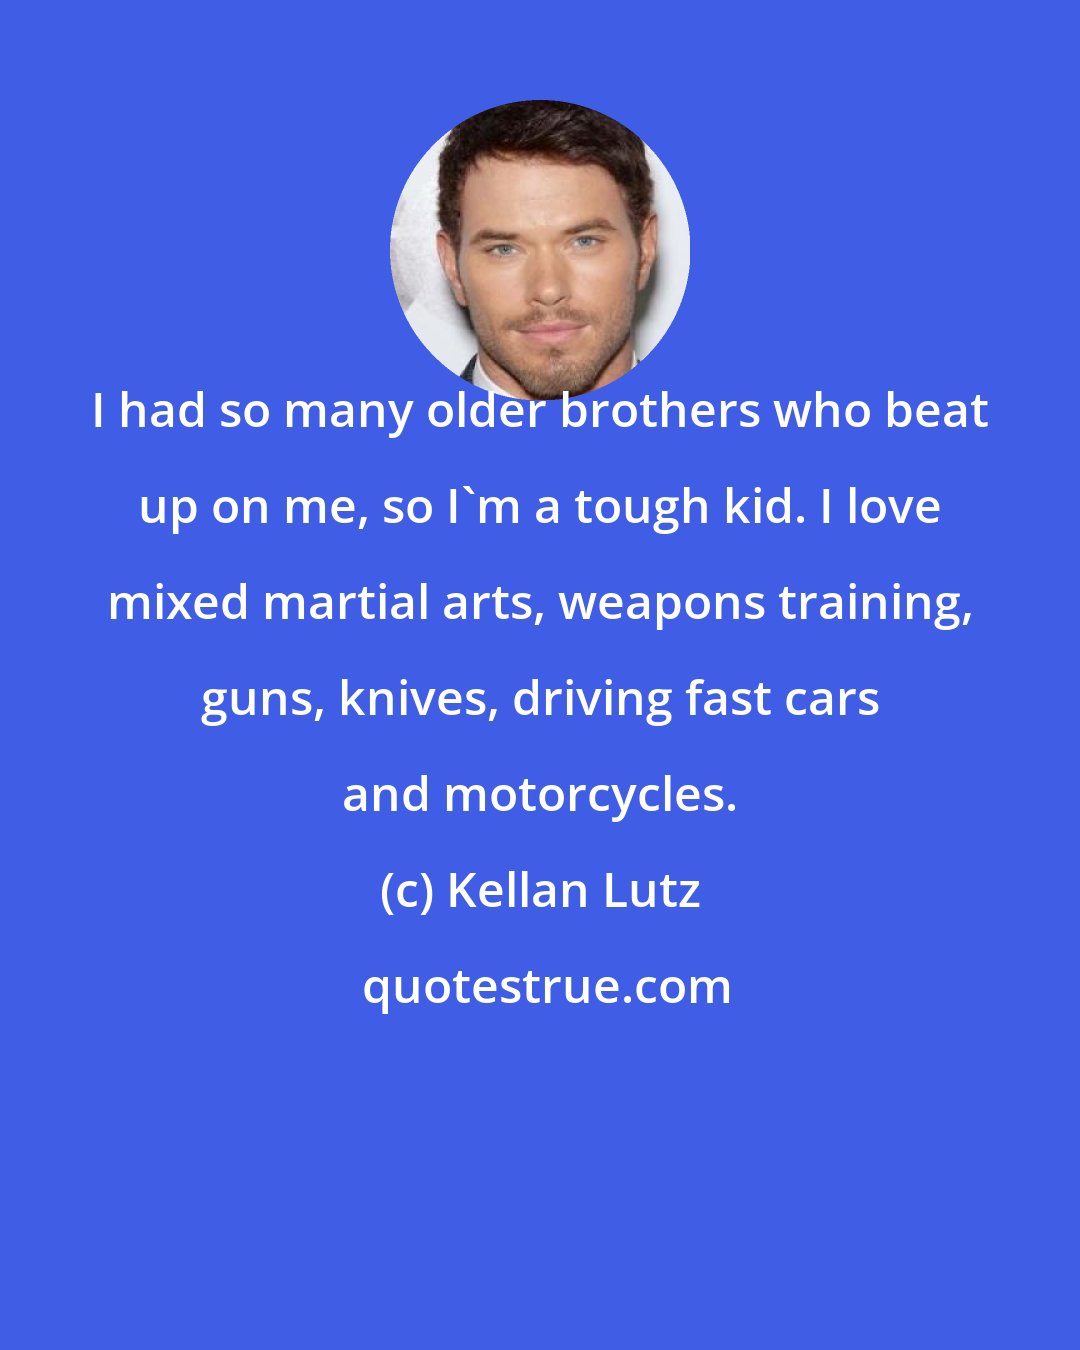 Kellan Lutz: I had so many older brothers who beat up on me, so I'm a tough kid. I love mixed martial arts, weapons training, guns, knives, driving fast cars and motorcycles.